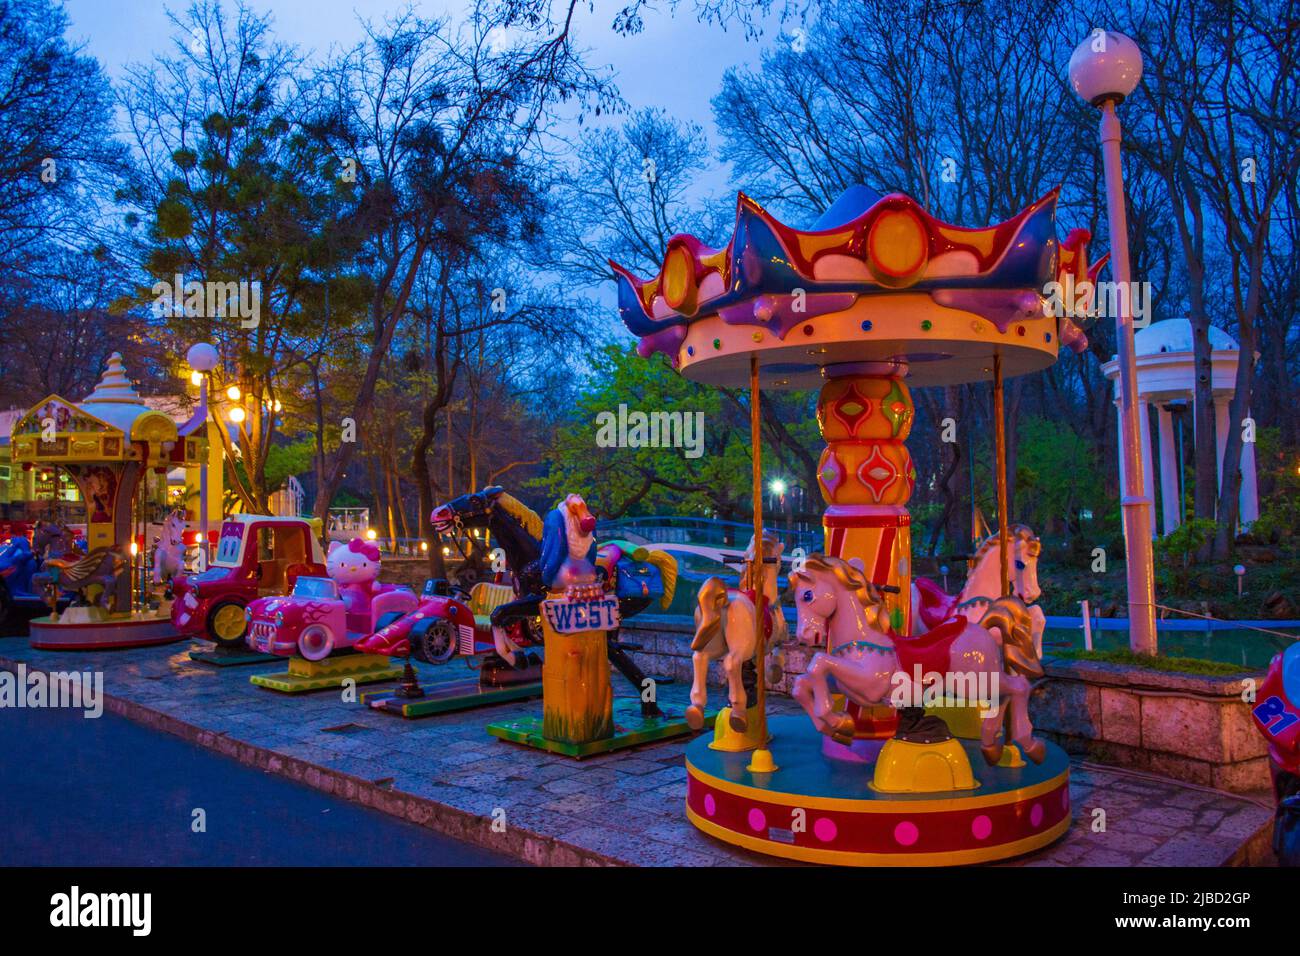 Evening view of Amusement park for children offering rides, games, activities & snacks in a playground–like setting.Varna,Sea Garden,Bulgaria Stock Photo